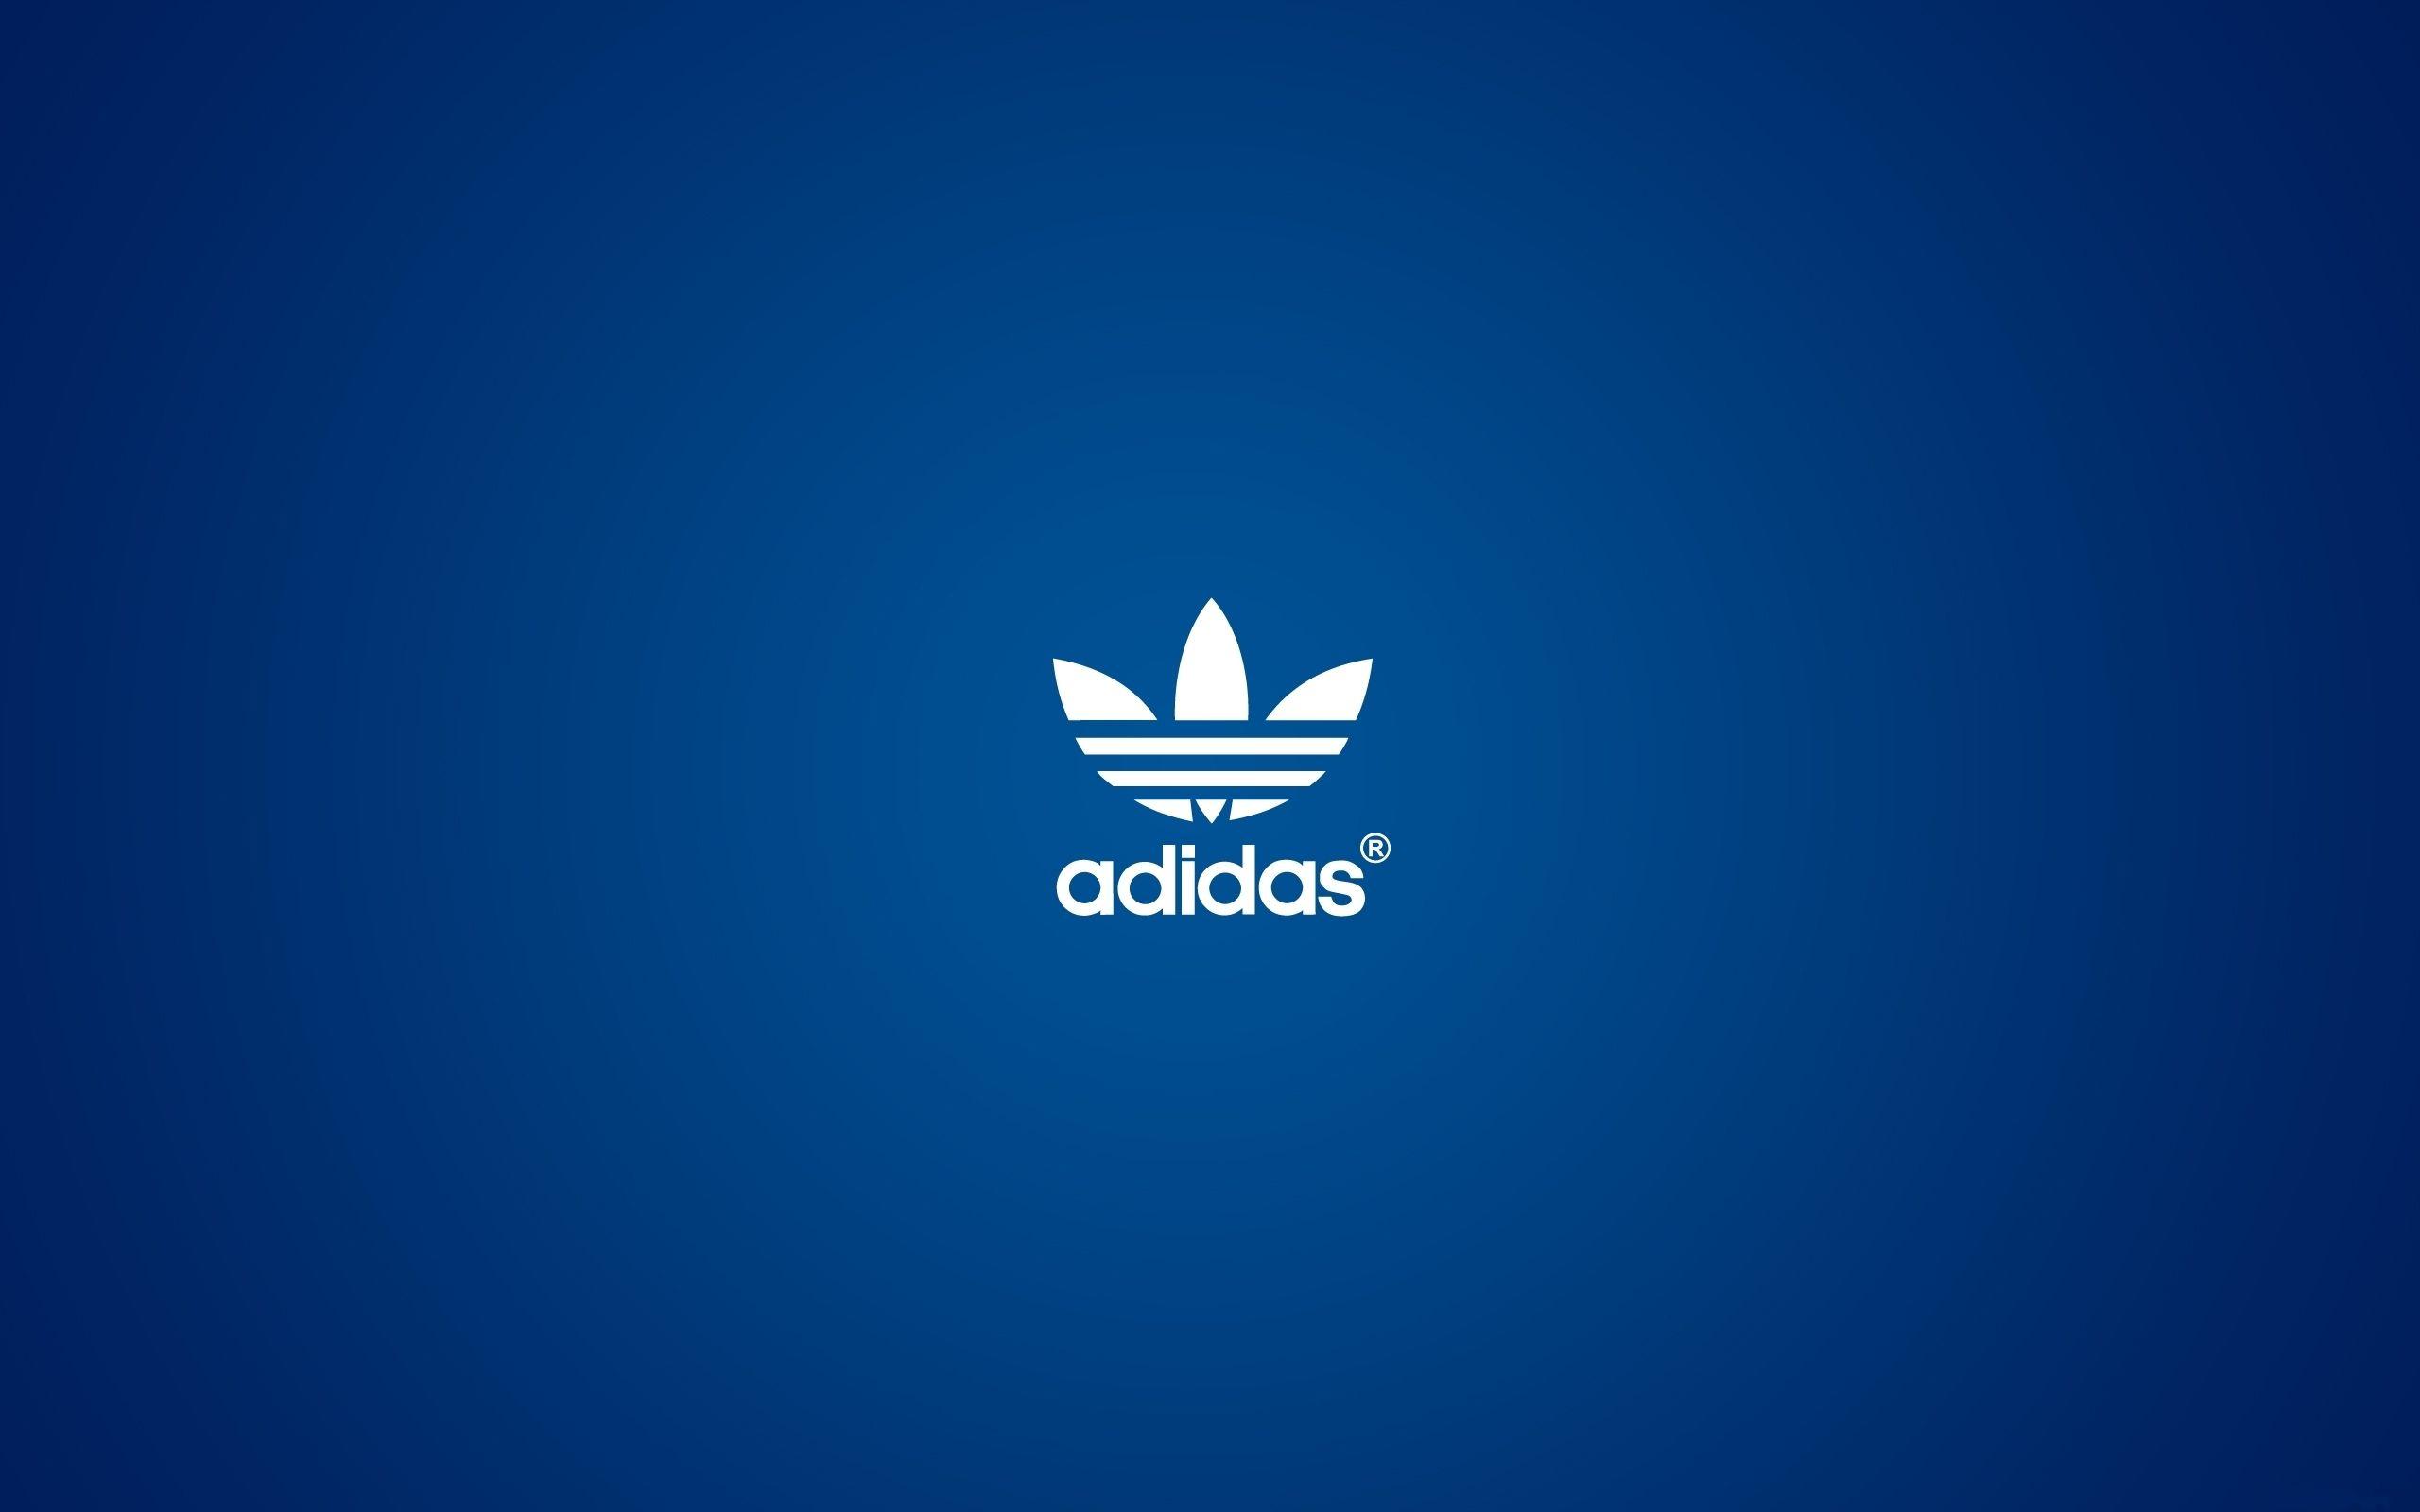 Best image about adidas. Soccer, Adidas sport